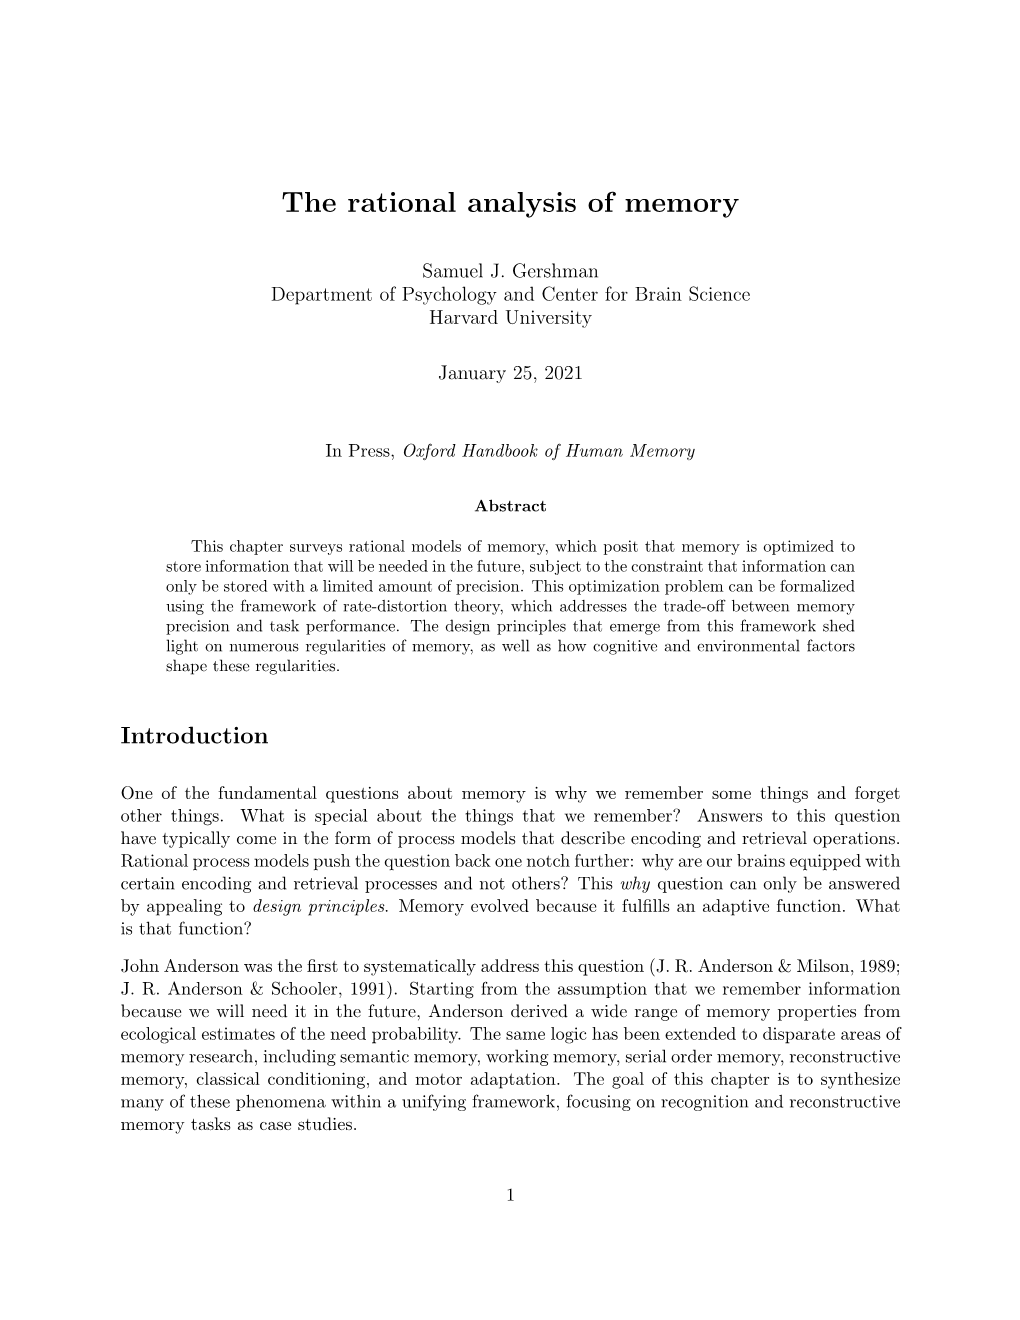 The Rational Analysis of Memory